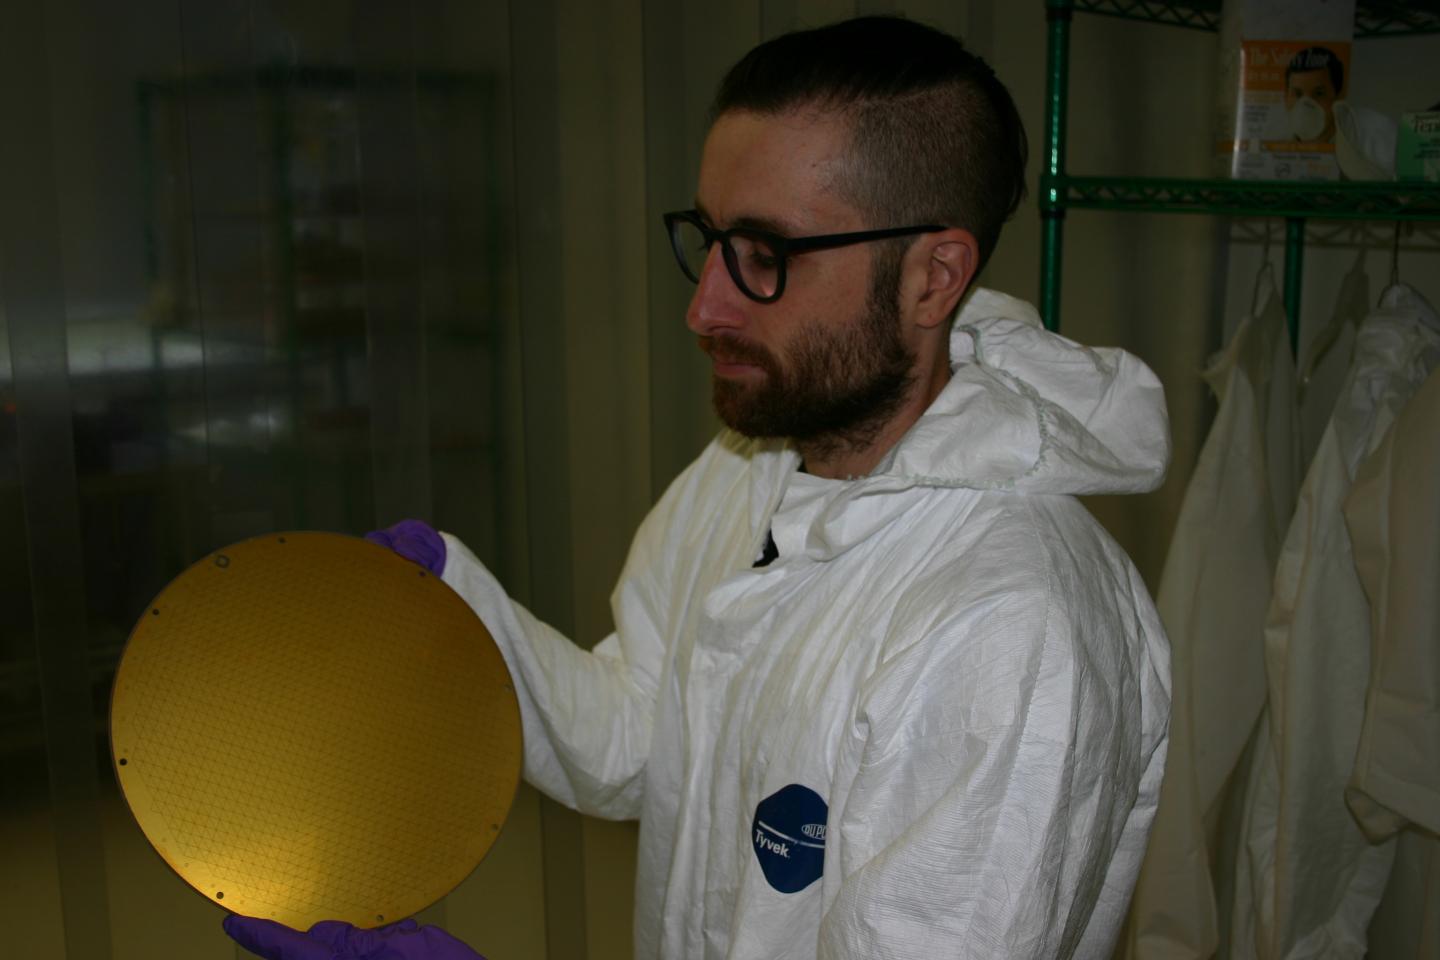 Yassid Ayyad wears a white cleanroom suit and holds a gold-colored disc, about the size of a soccer ball.